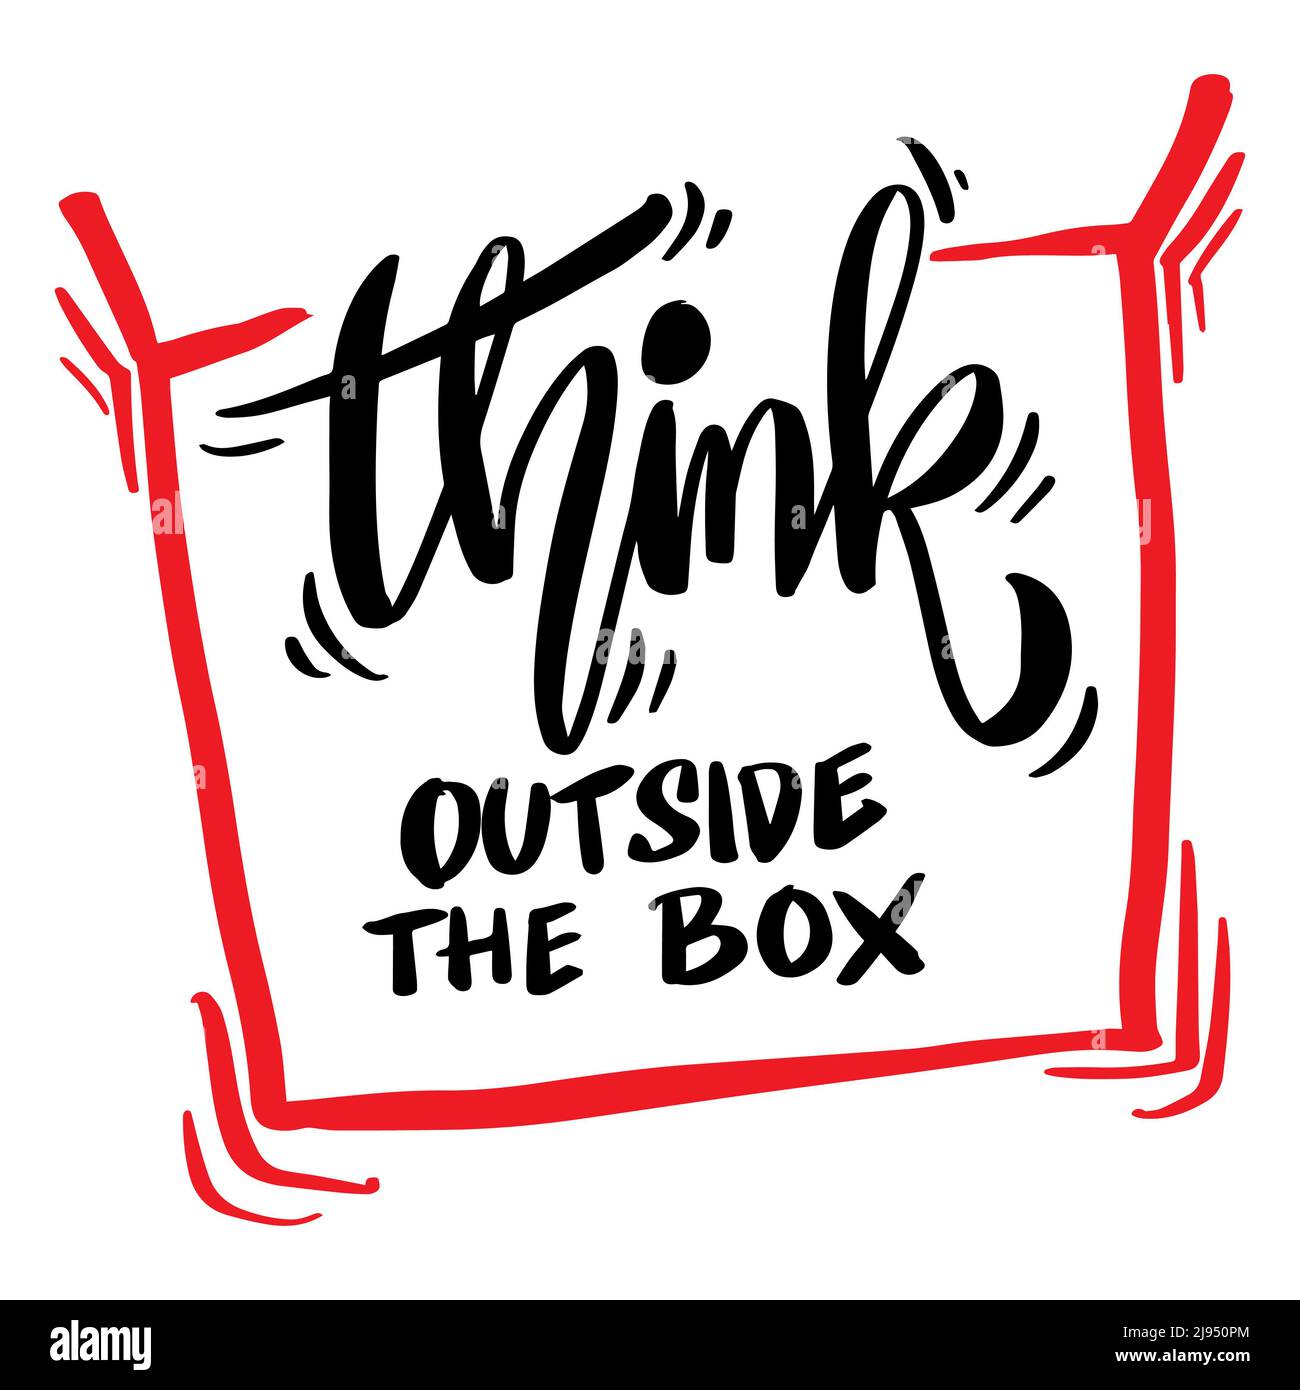 Think outside the box. Poster quotes. Stock Photo